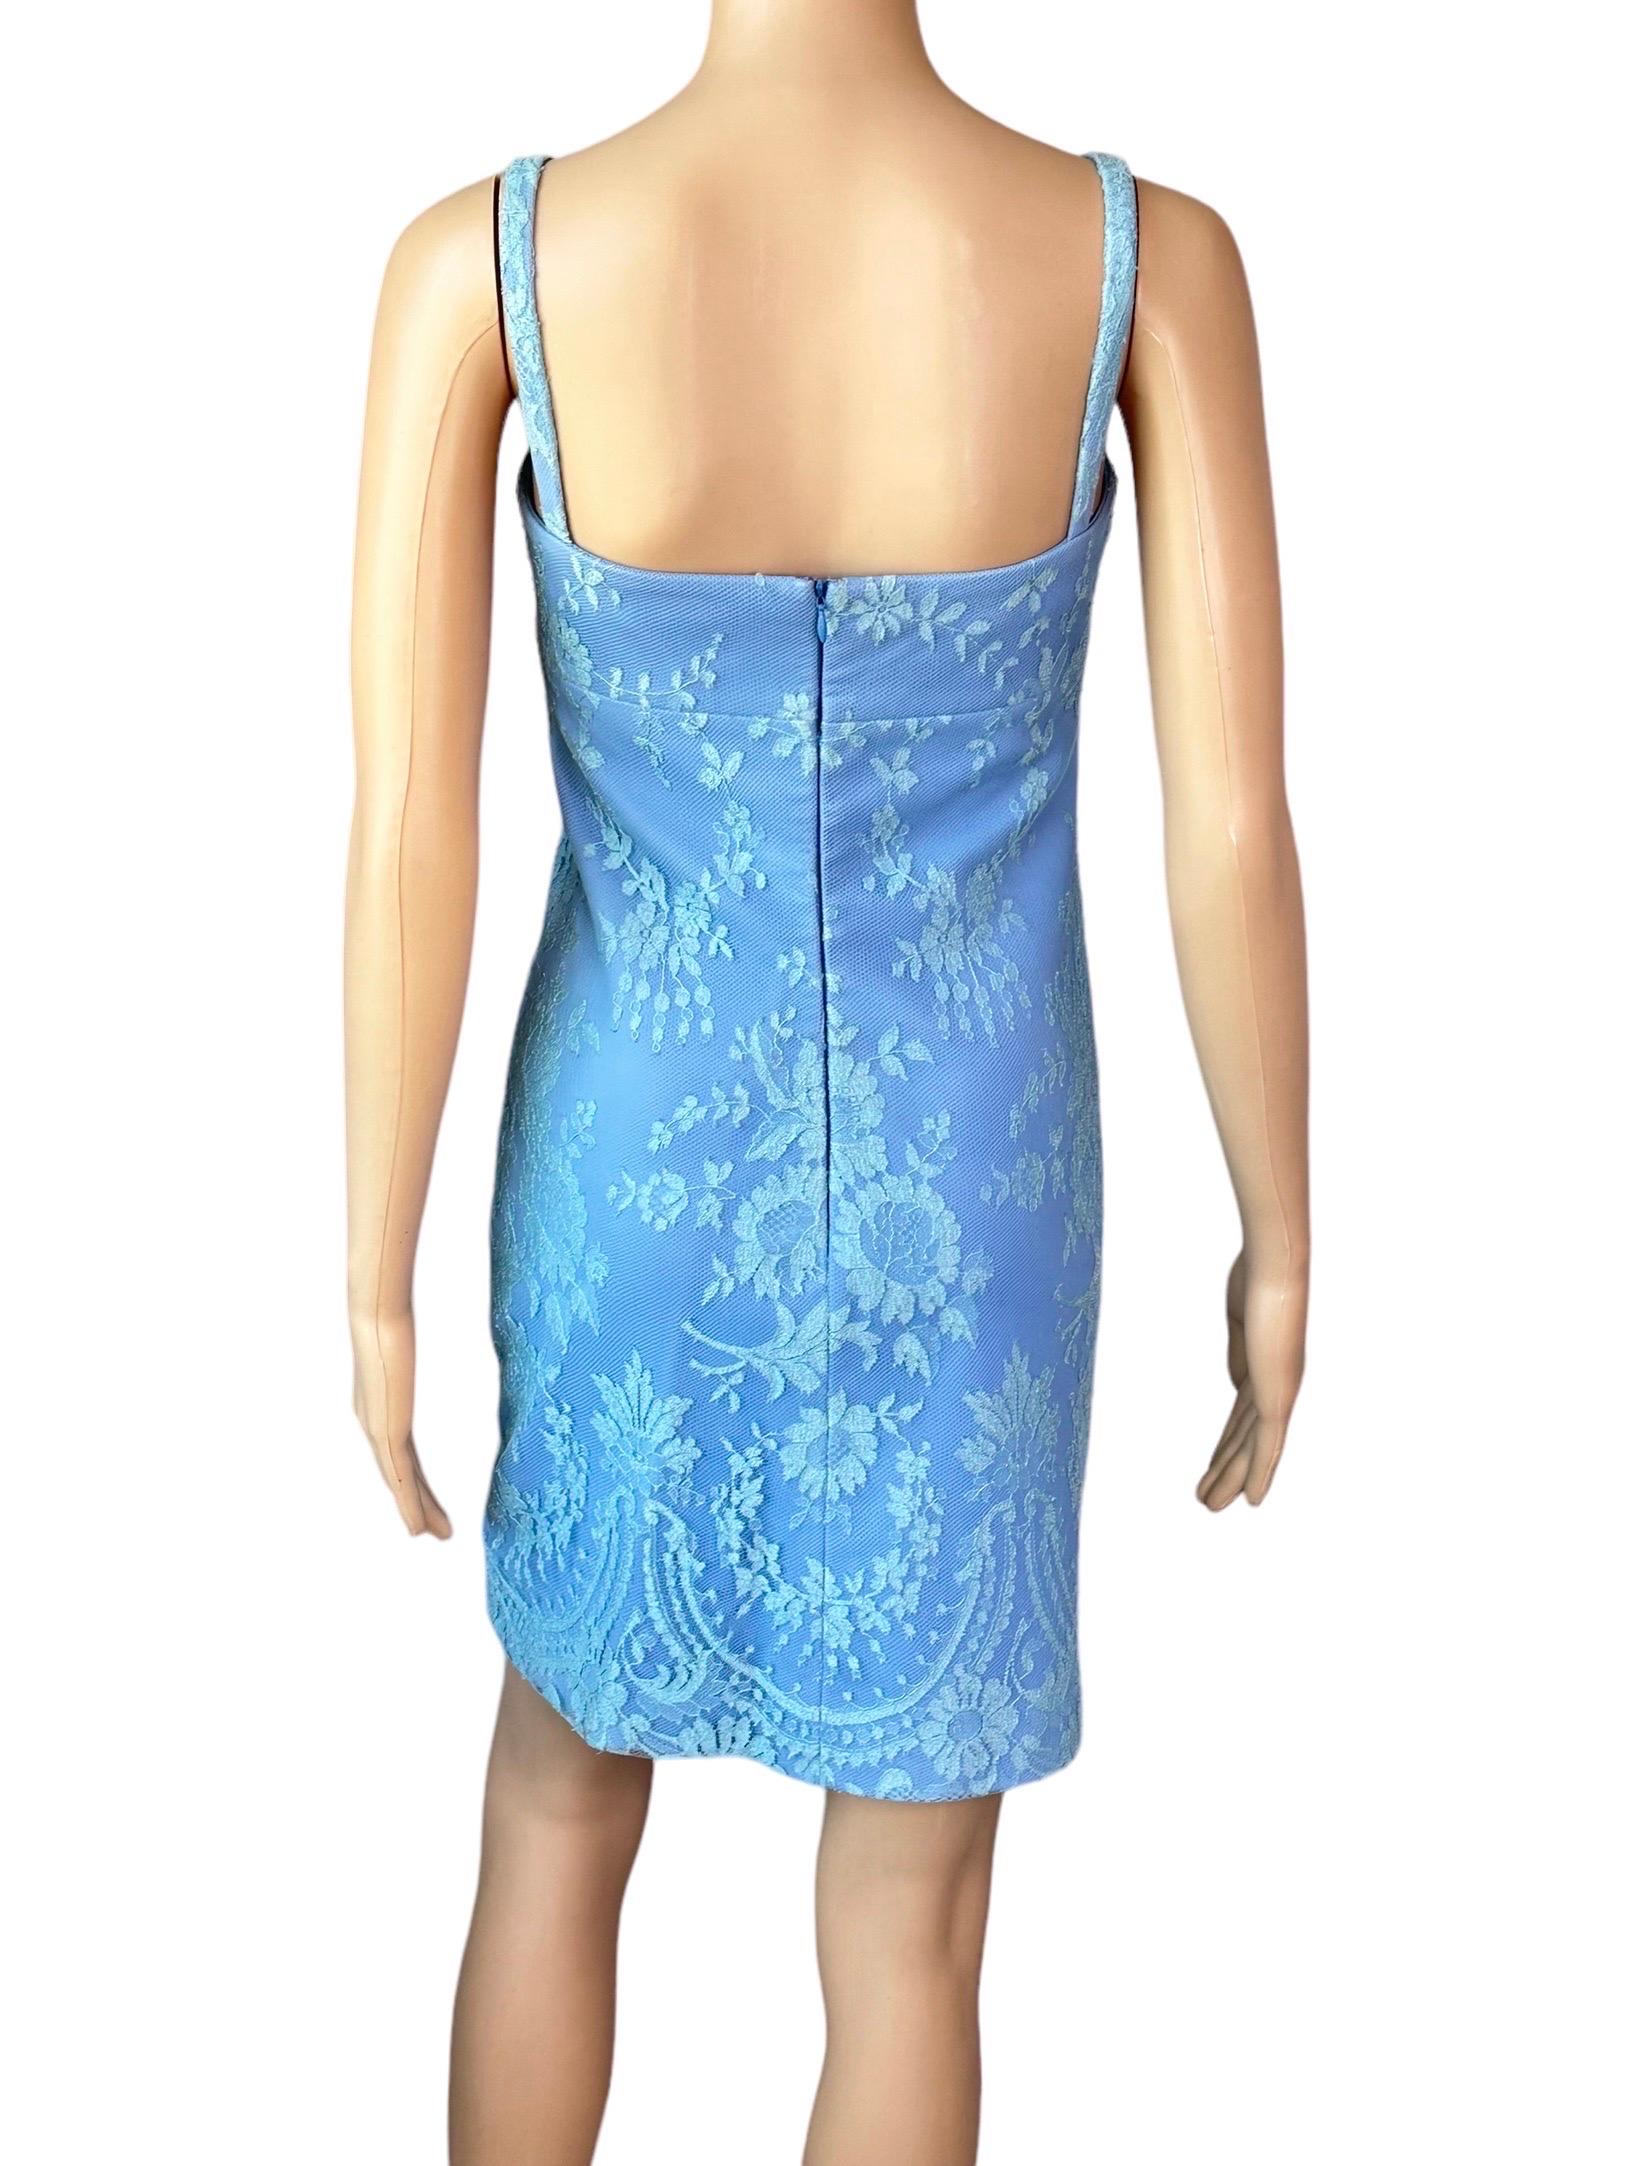 Women's Gianni Versace F/W 1996 Vintage Floral Lace and Leather Blue Mini Dress  For Sale